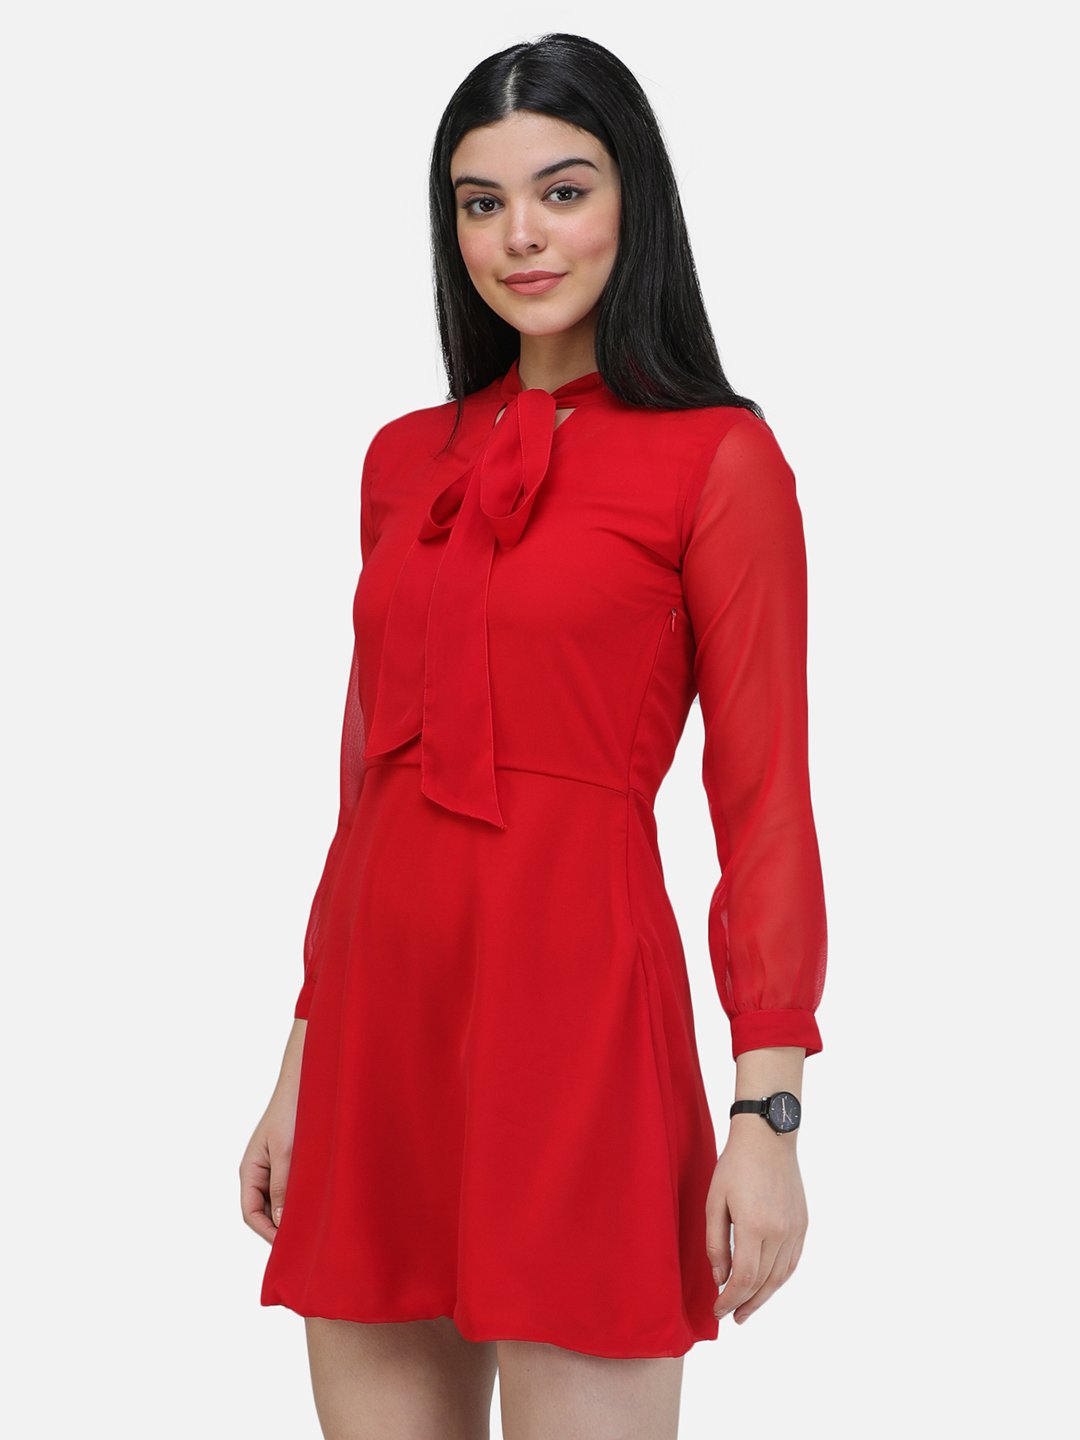 SCORPIUS Red front knot Mini Dress